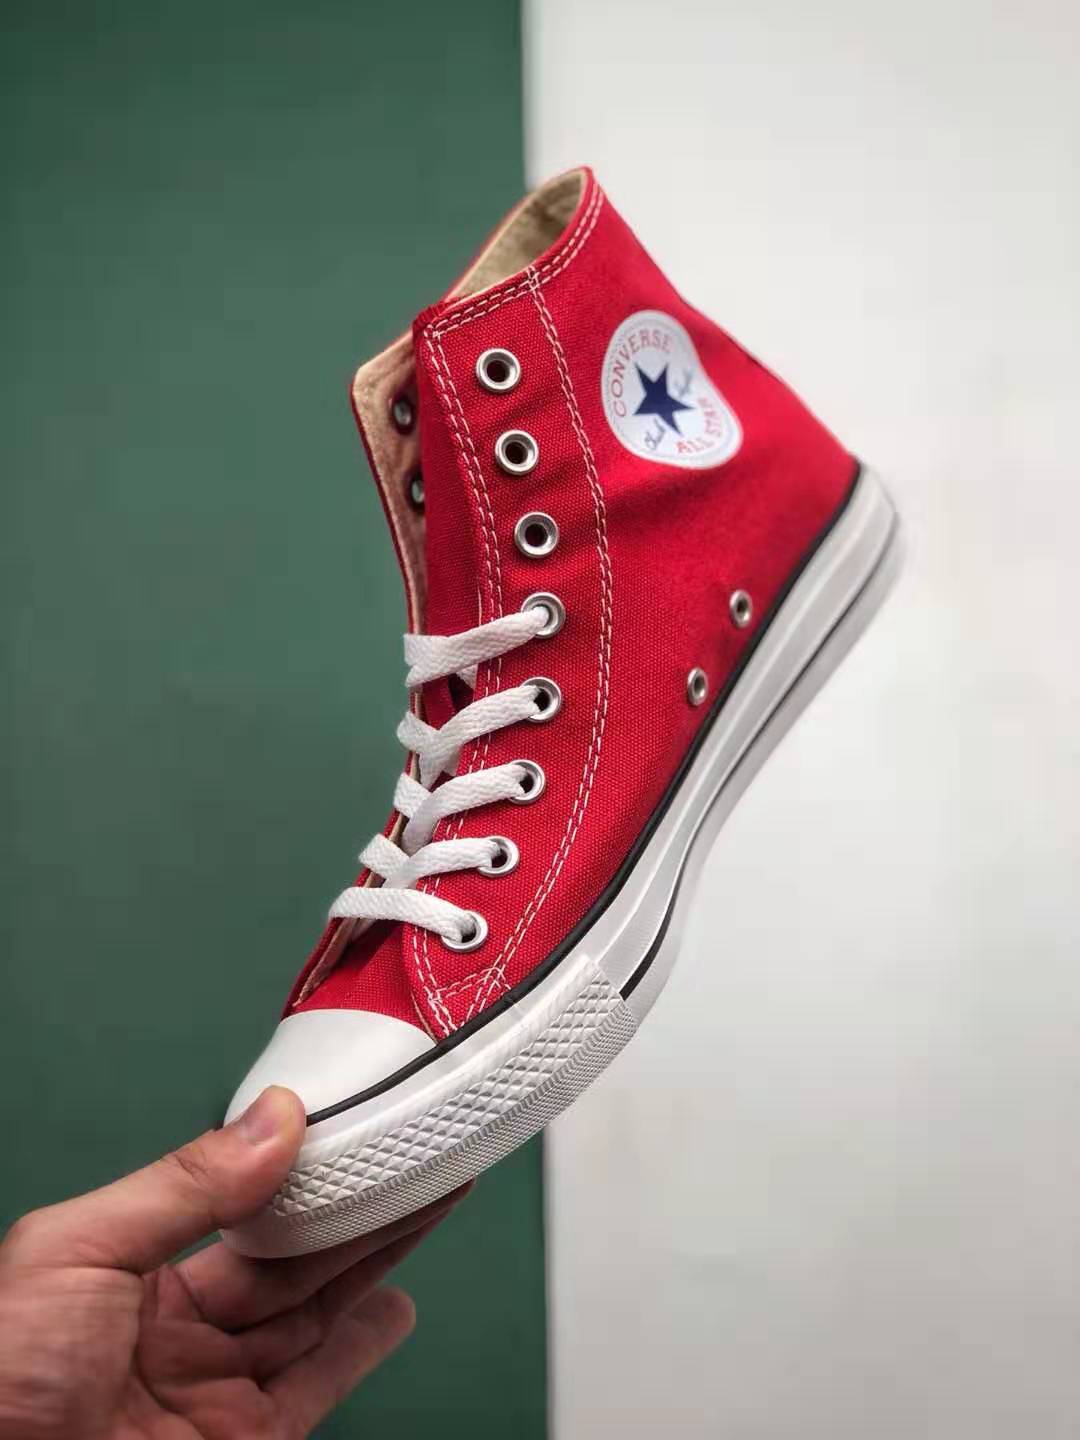 Converse Chuck Taylor All Star 101013 - Classic Canvas Sneakers for All-Day Comfort